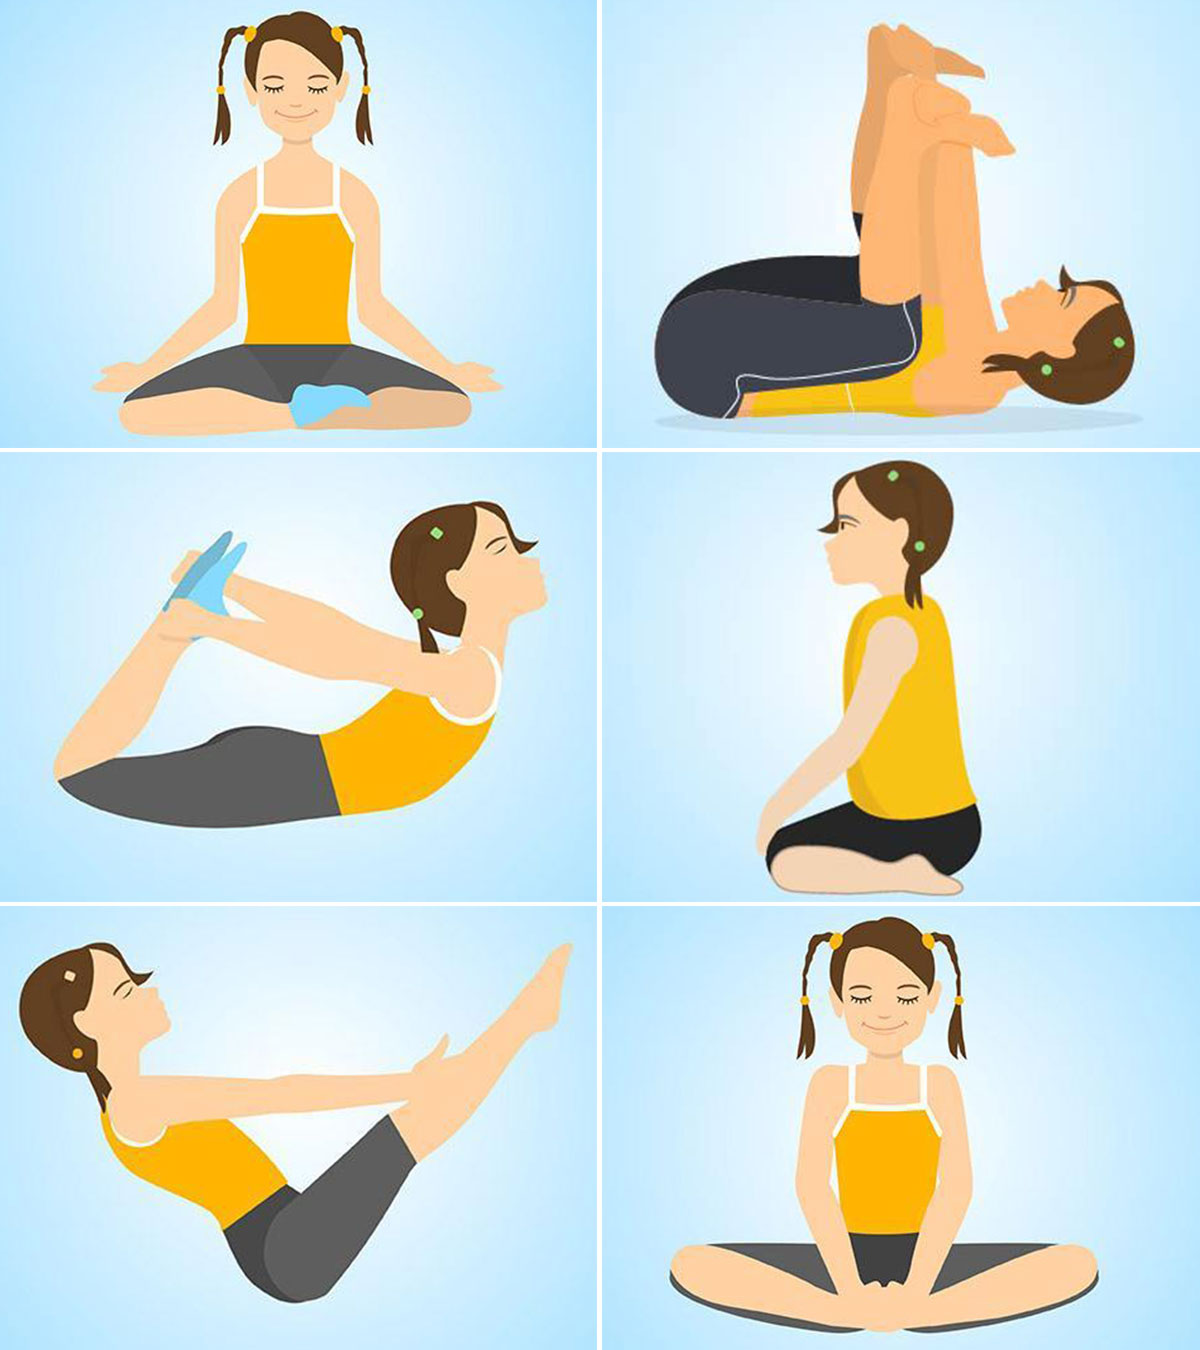 Get Your Cool On: 4 Person Yoga Poses for a Fun and Fulfilling Practice